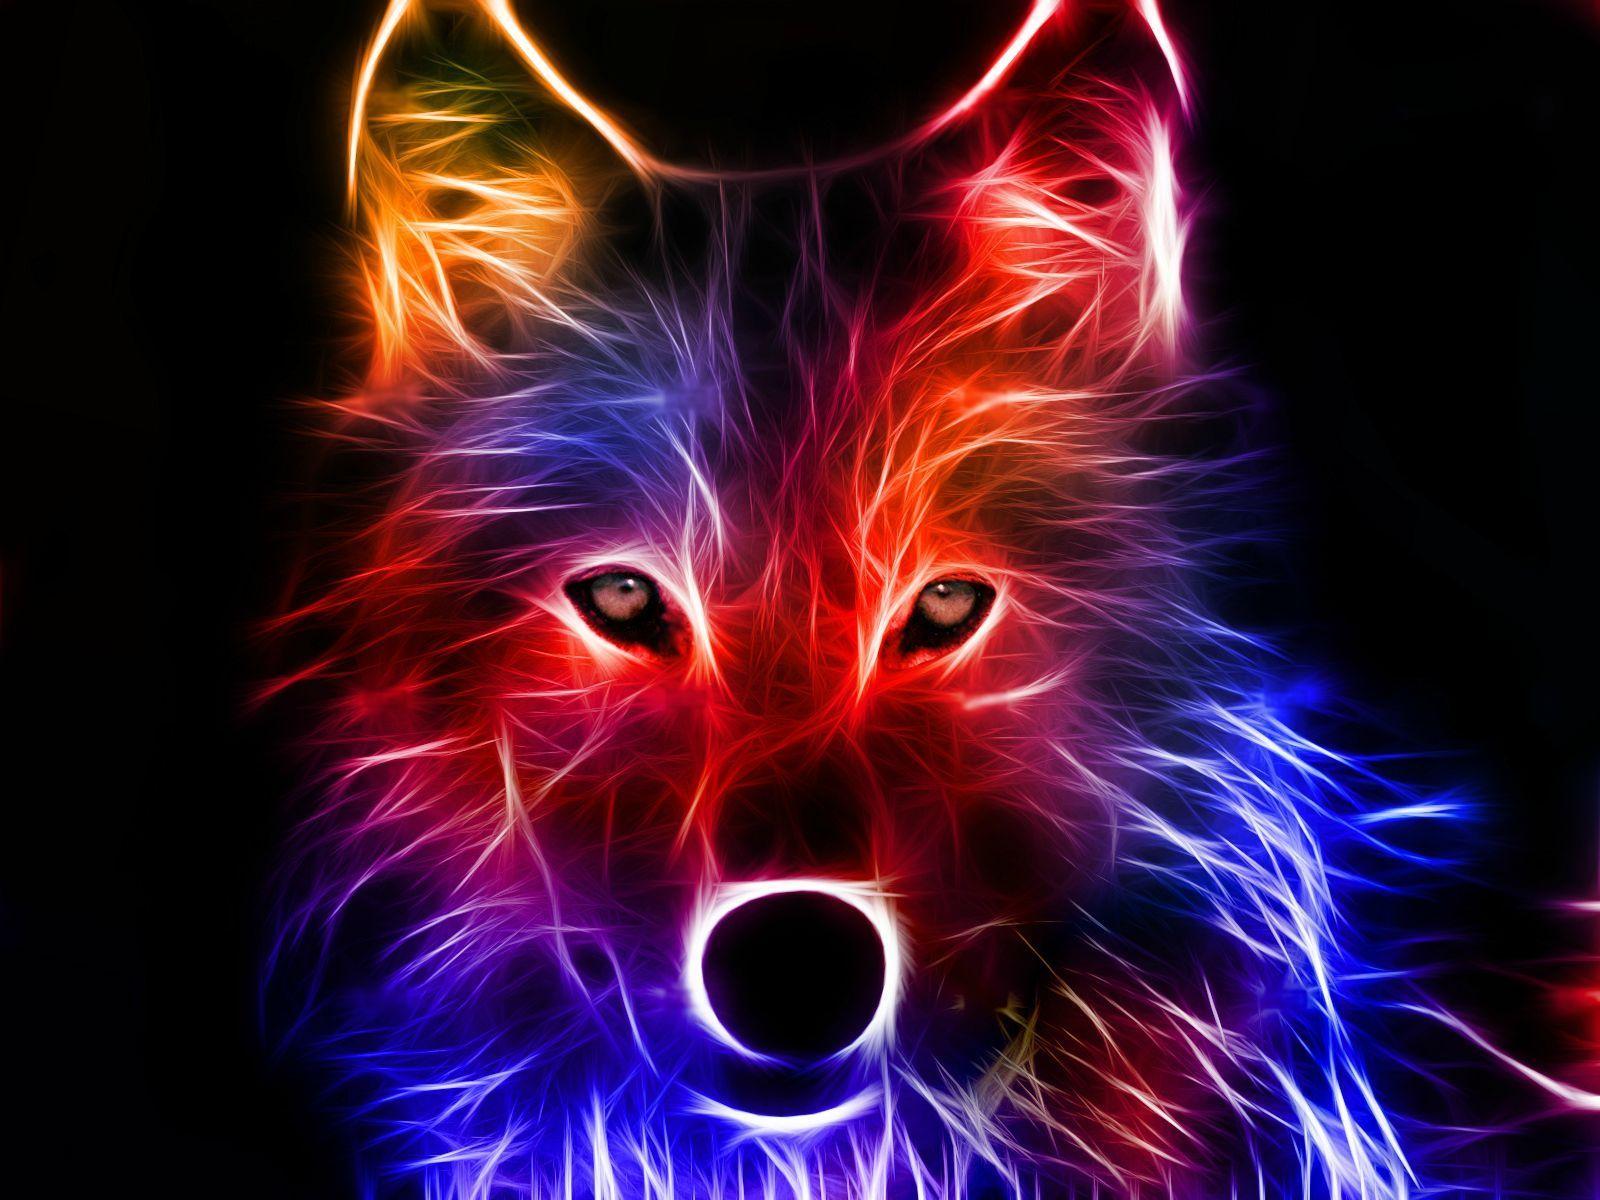 3D Wallpaper Free to Download. Live wallpaper, 3D and Wolf